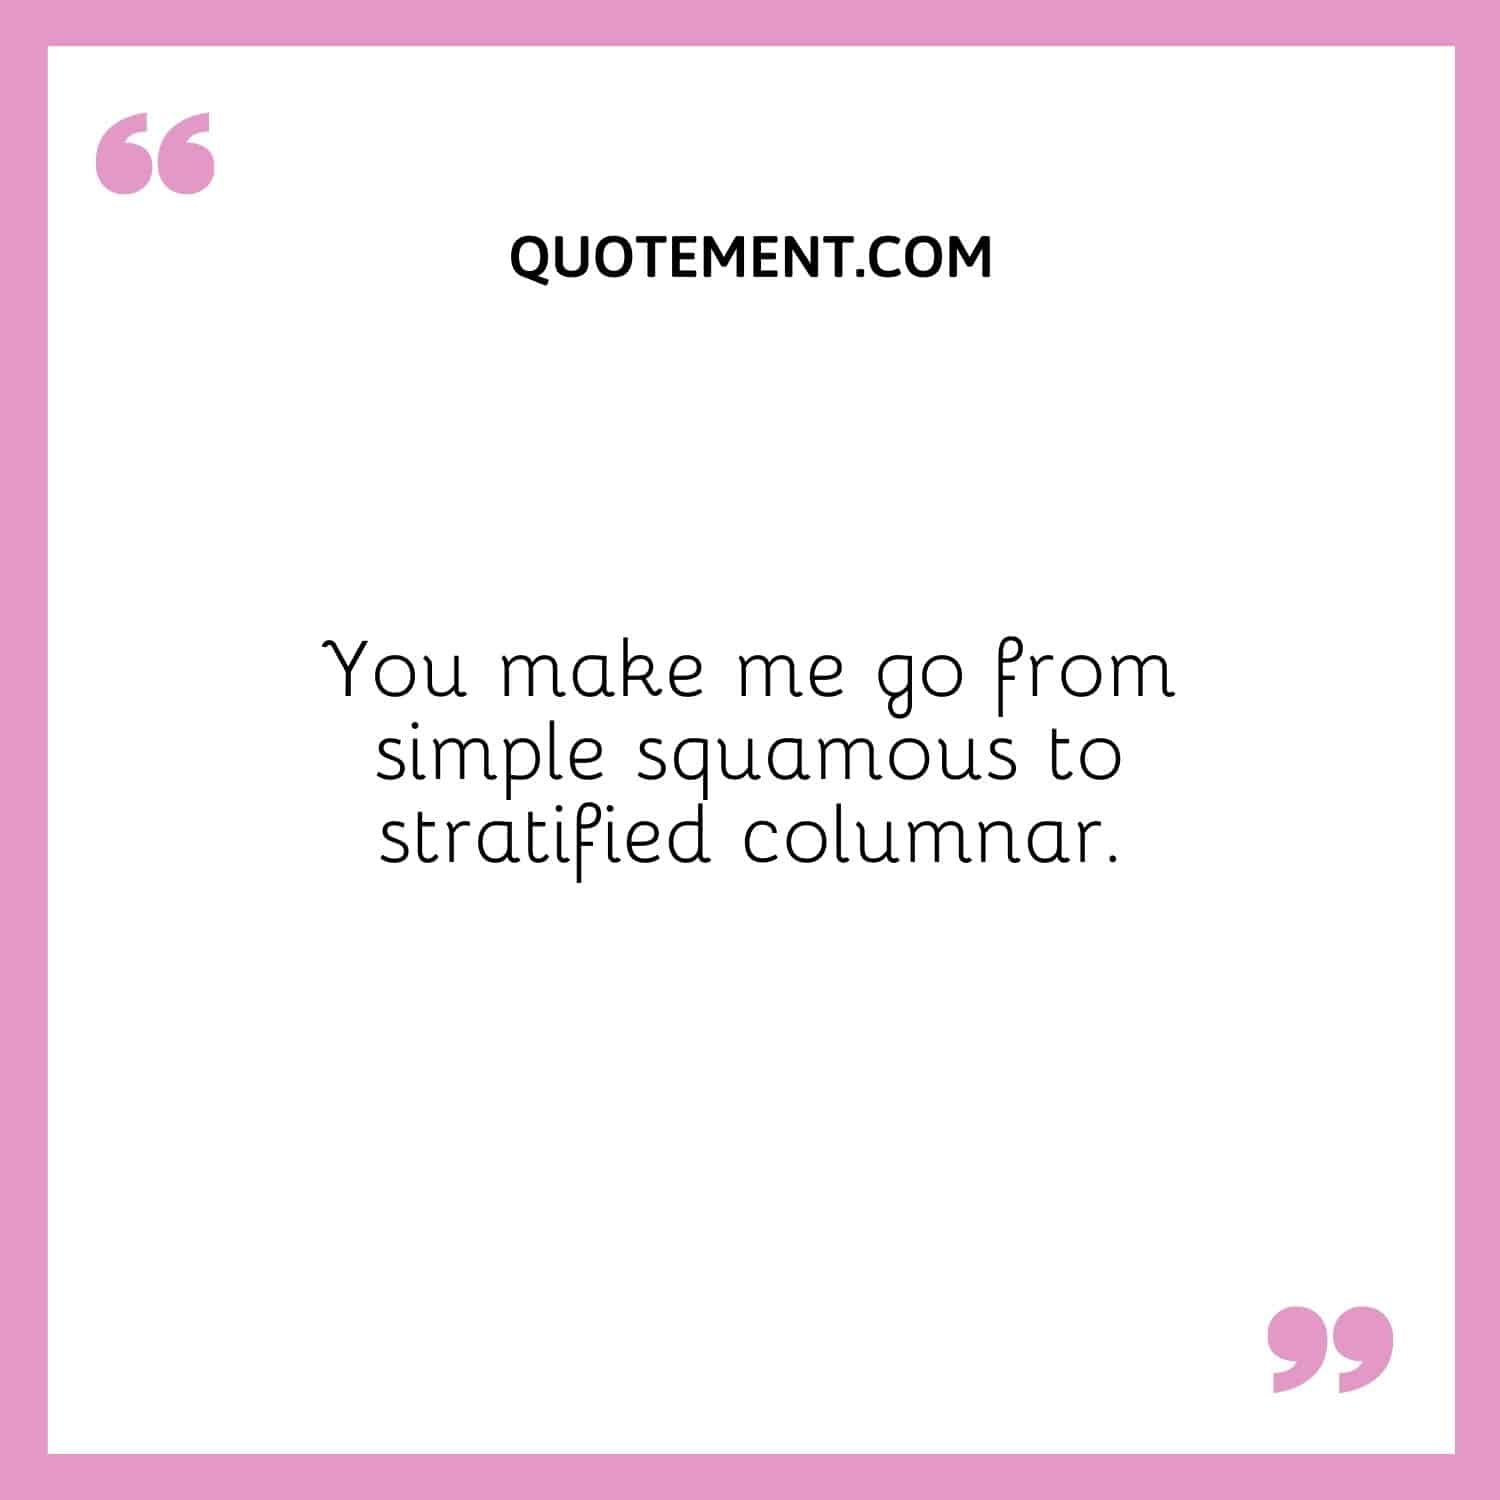 You make me go from simple squamous to stratified columnar.